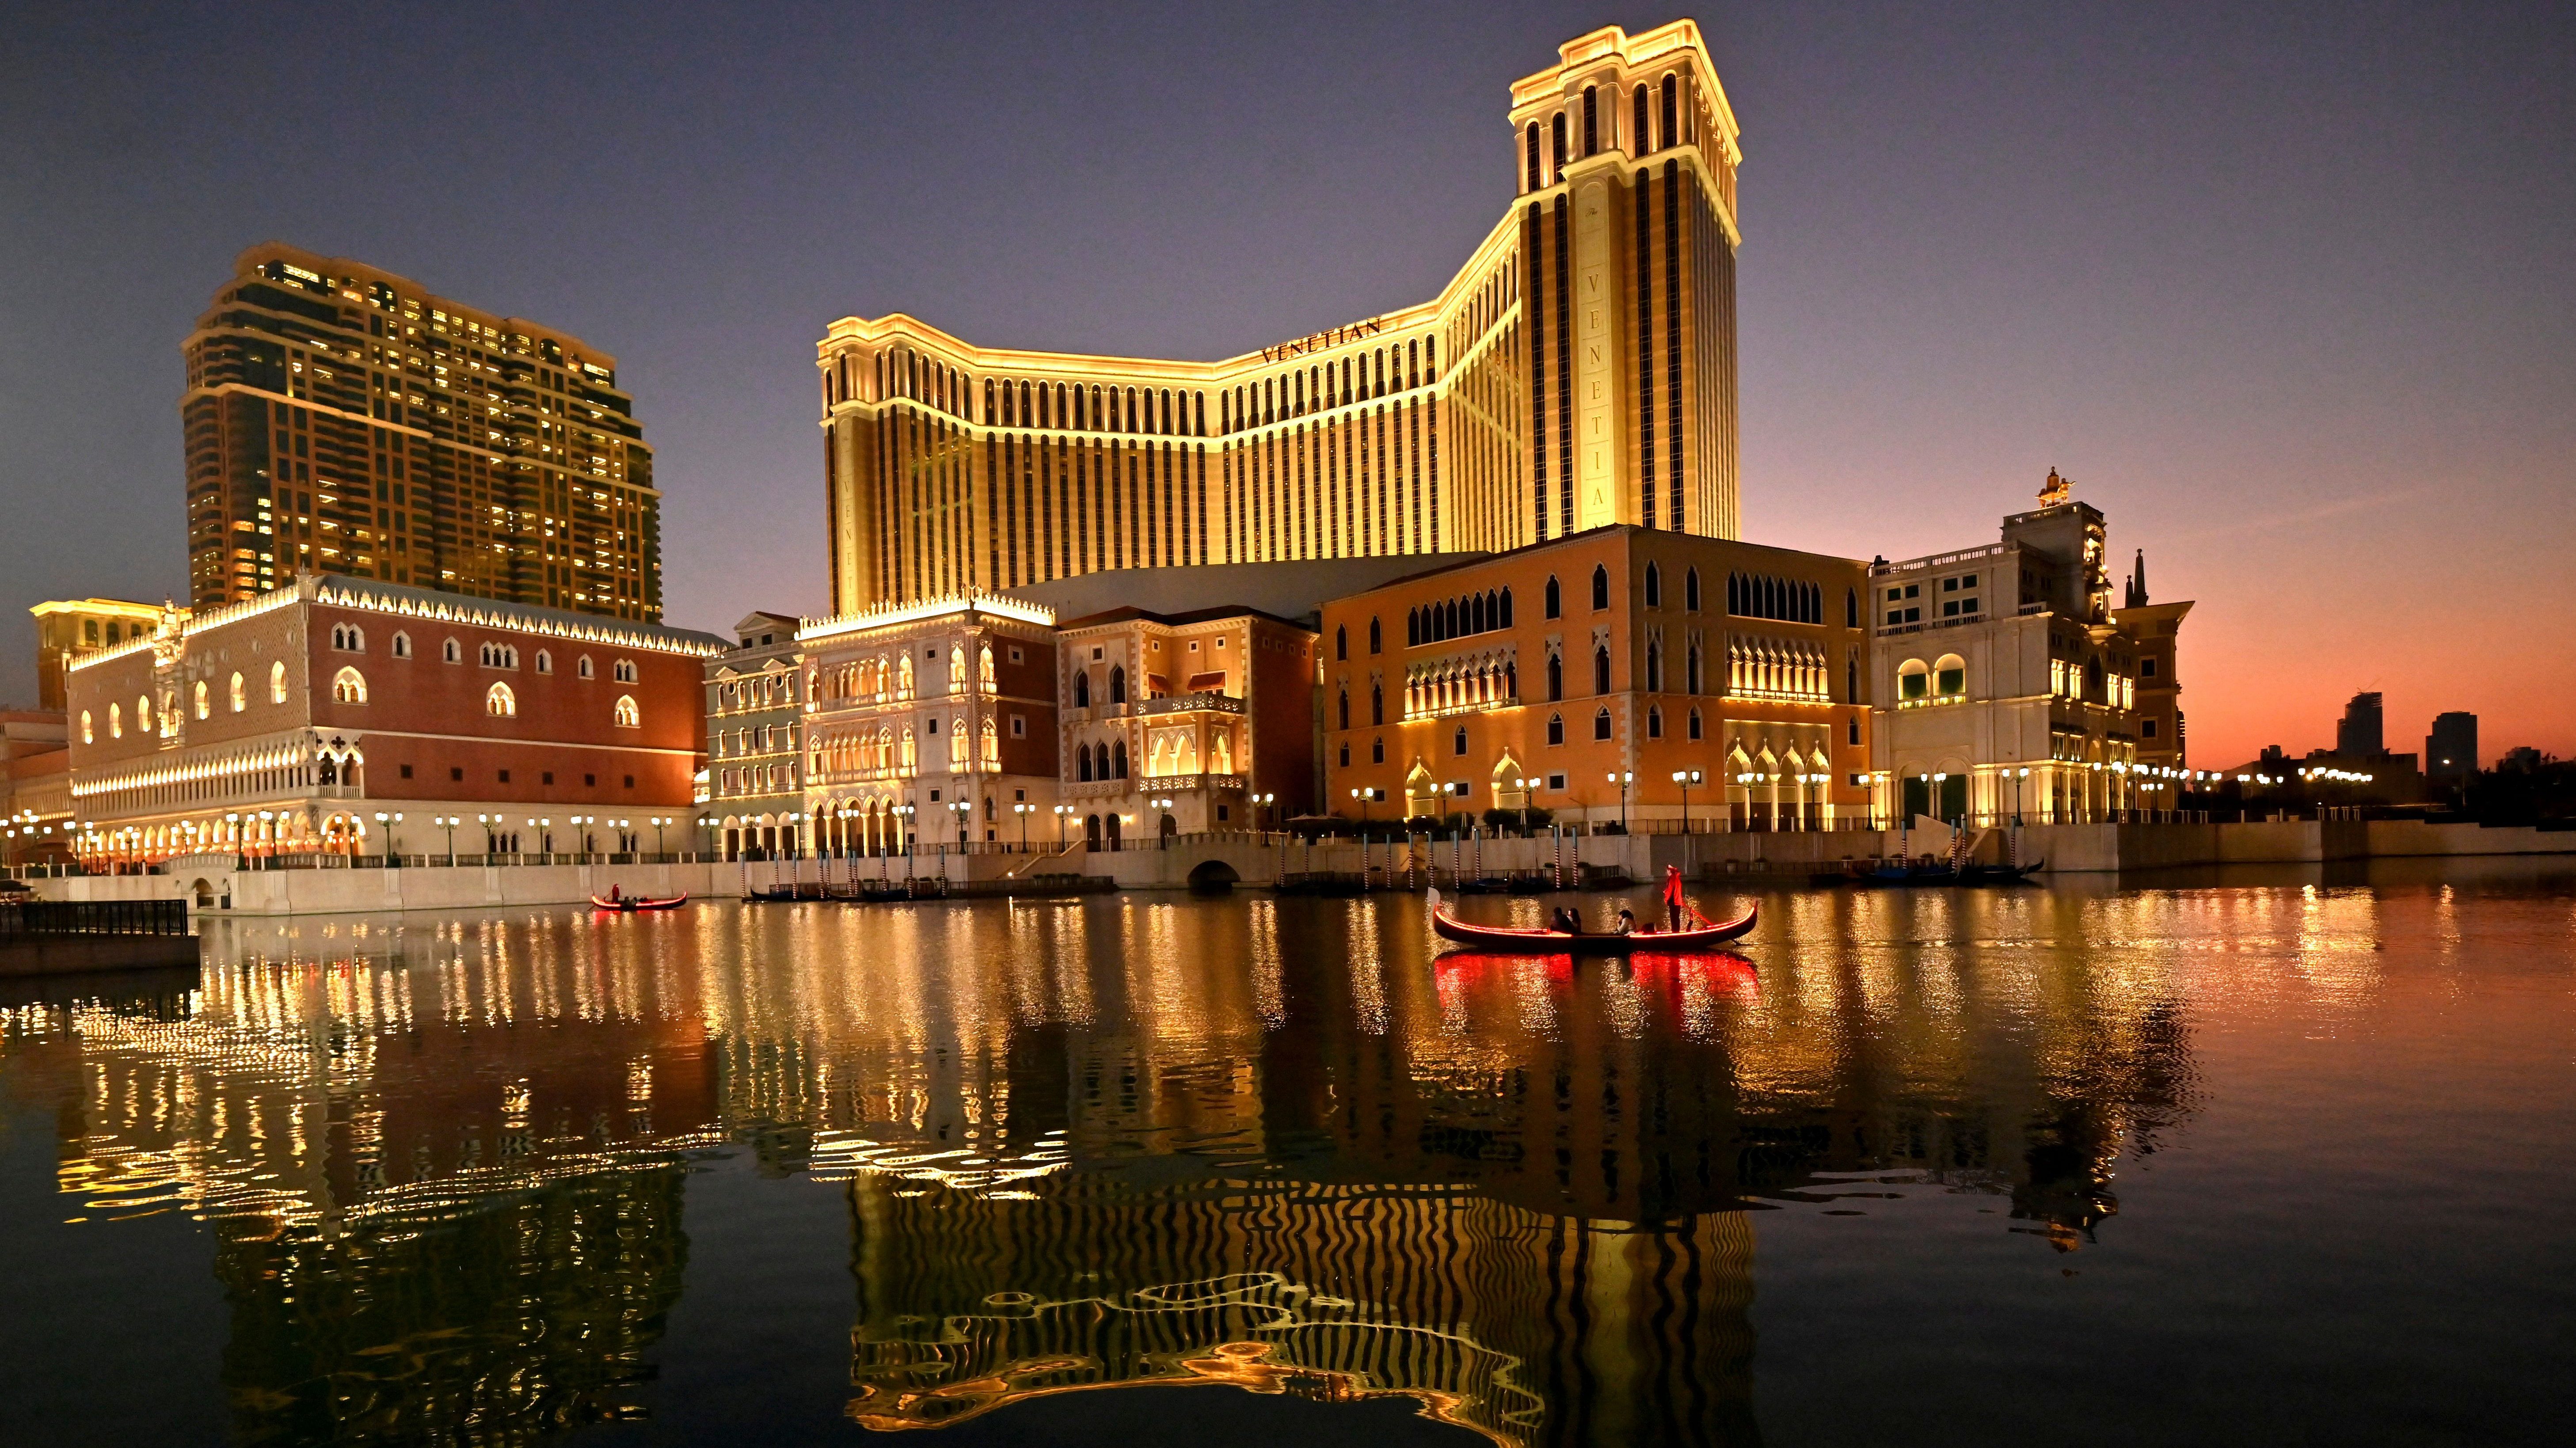 Can Macao — the “Las Vegas of the East” — move beyond gambling?